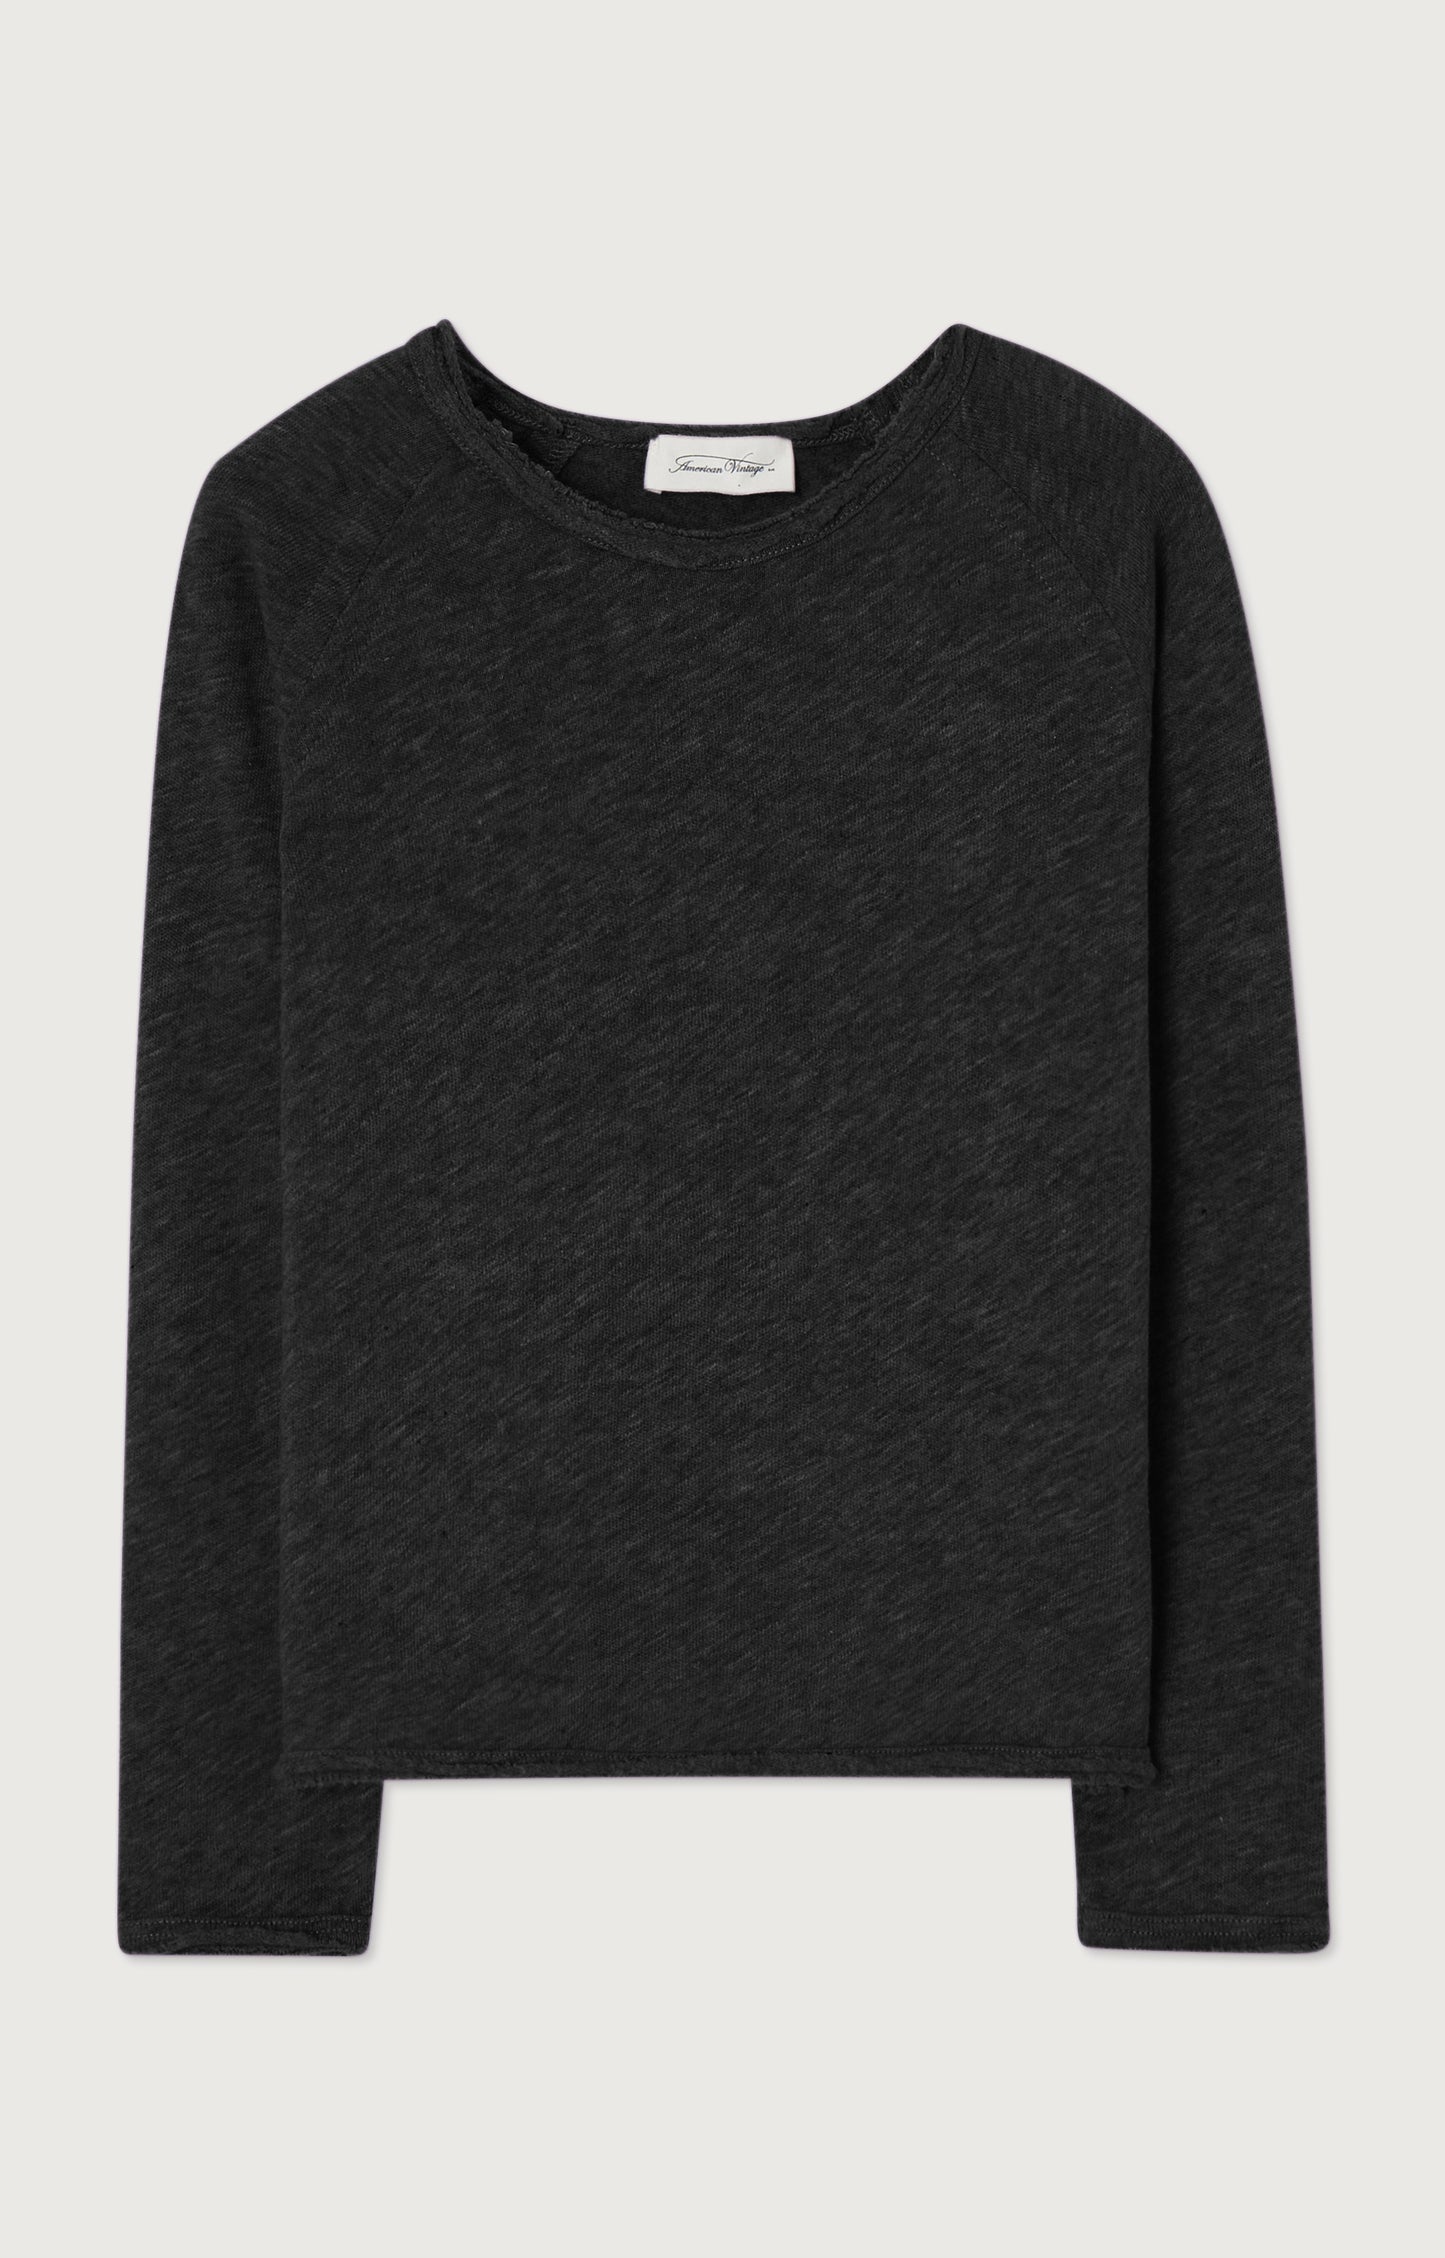 Longsleeve made of soft Sonoma cotton